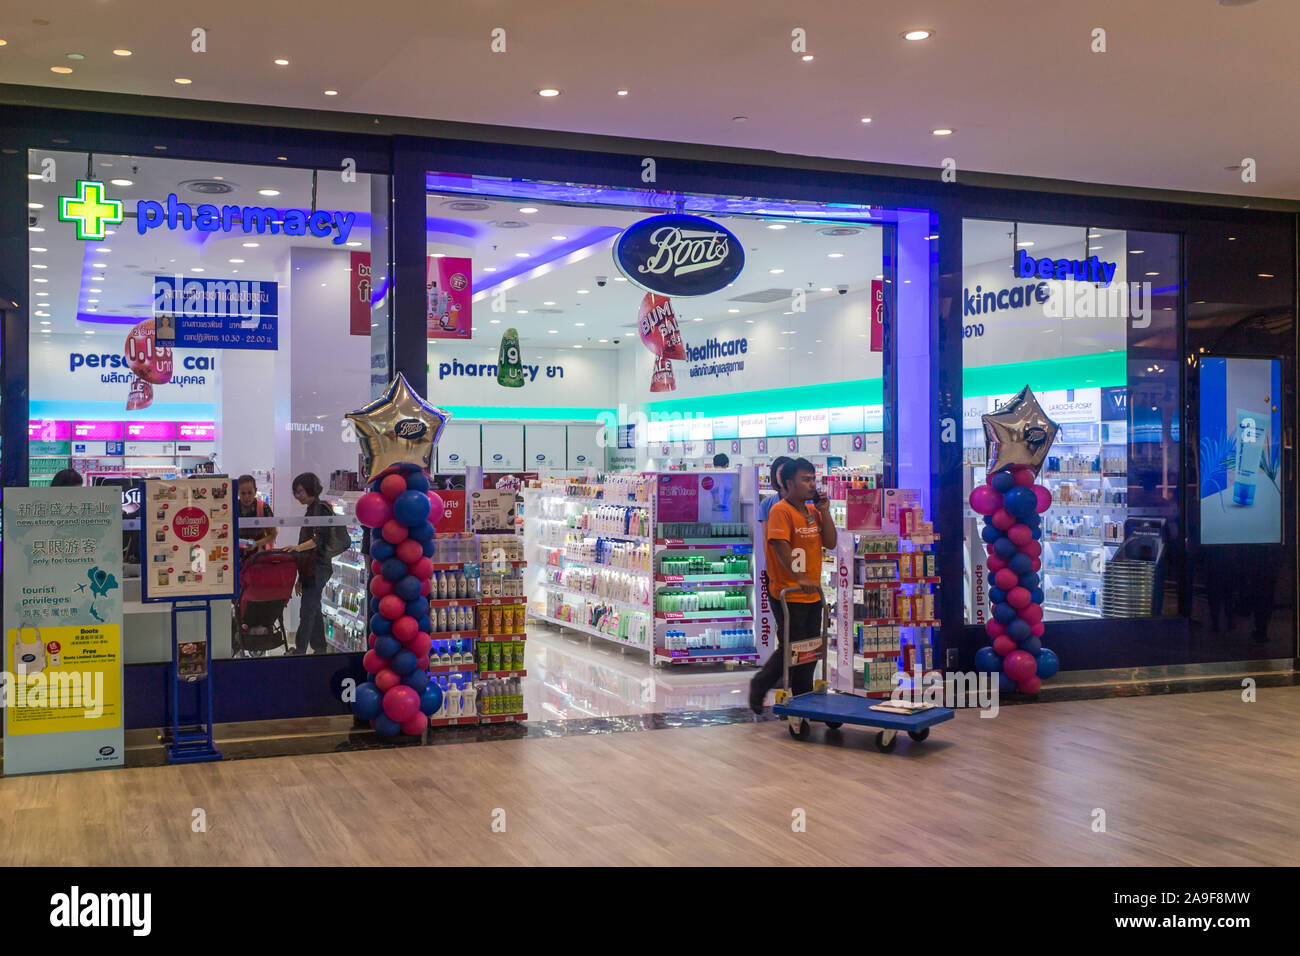 Boots Chemist Thailand High Resolution Stock Photography and Images - Alamy